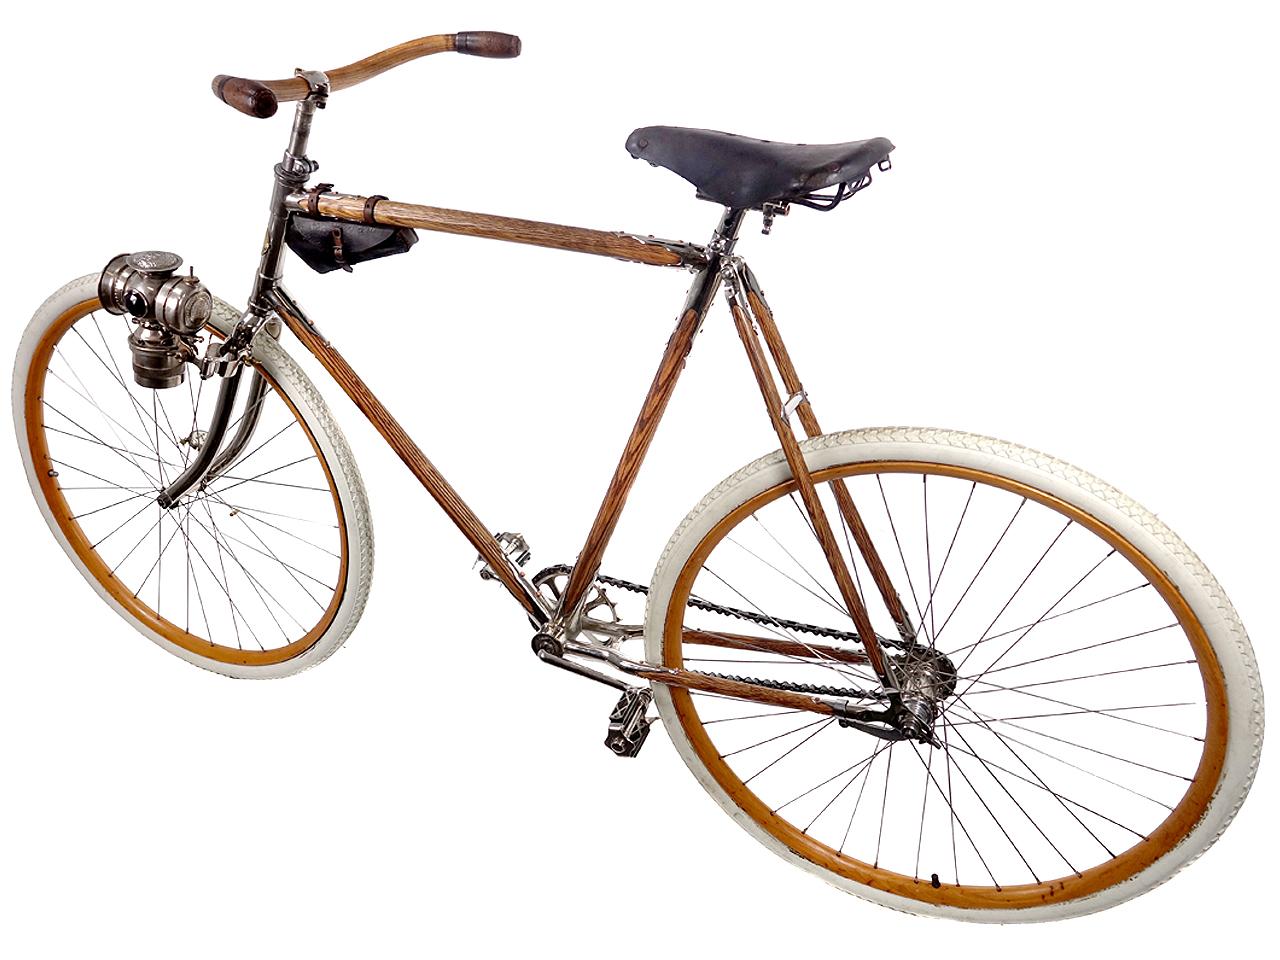 1890s bicycle